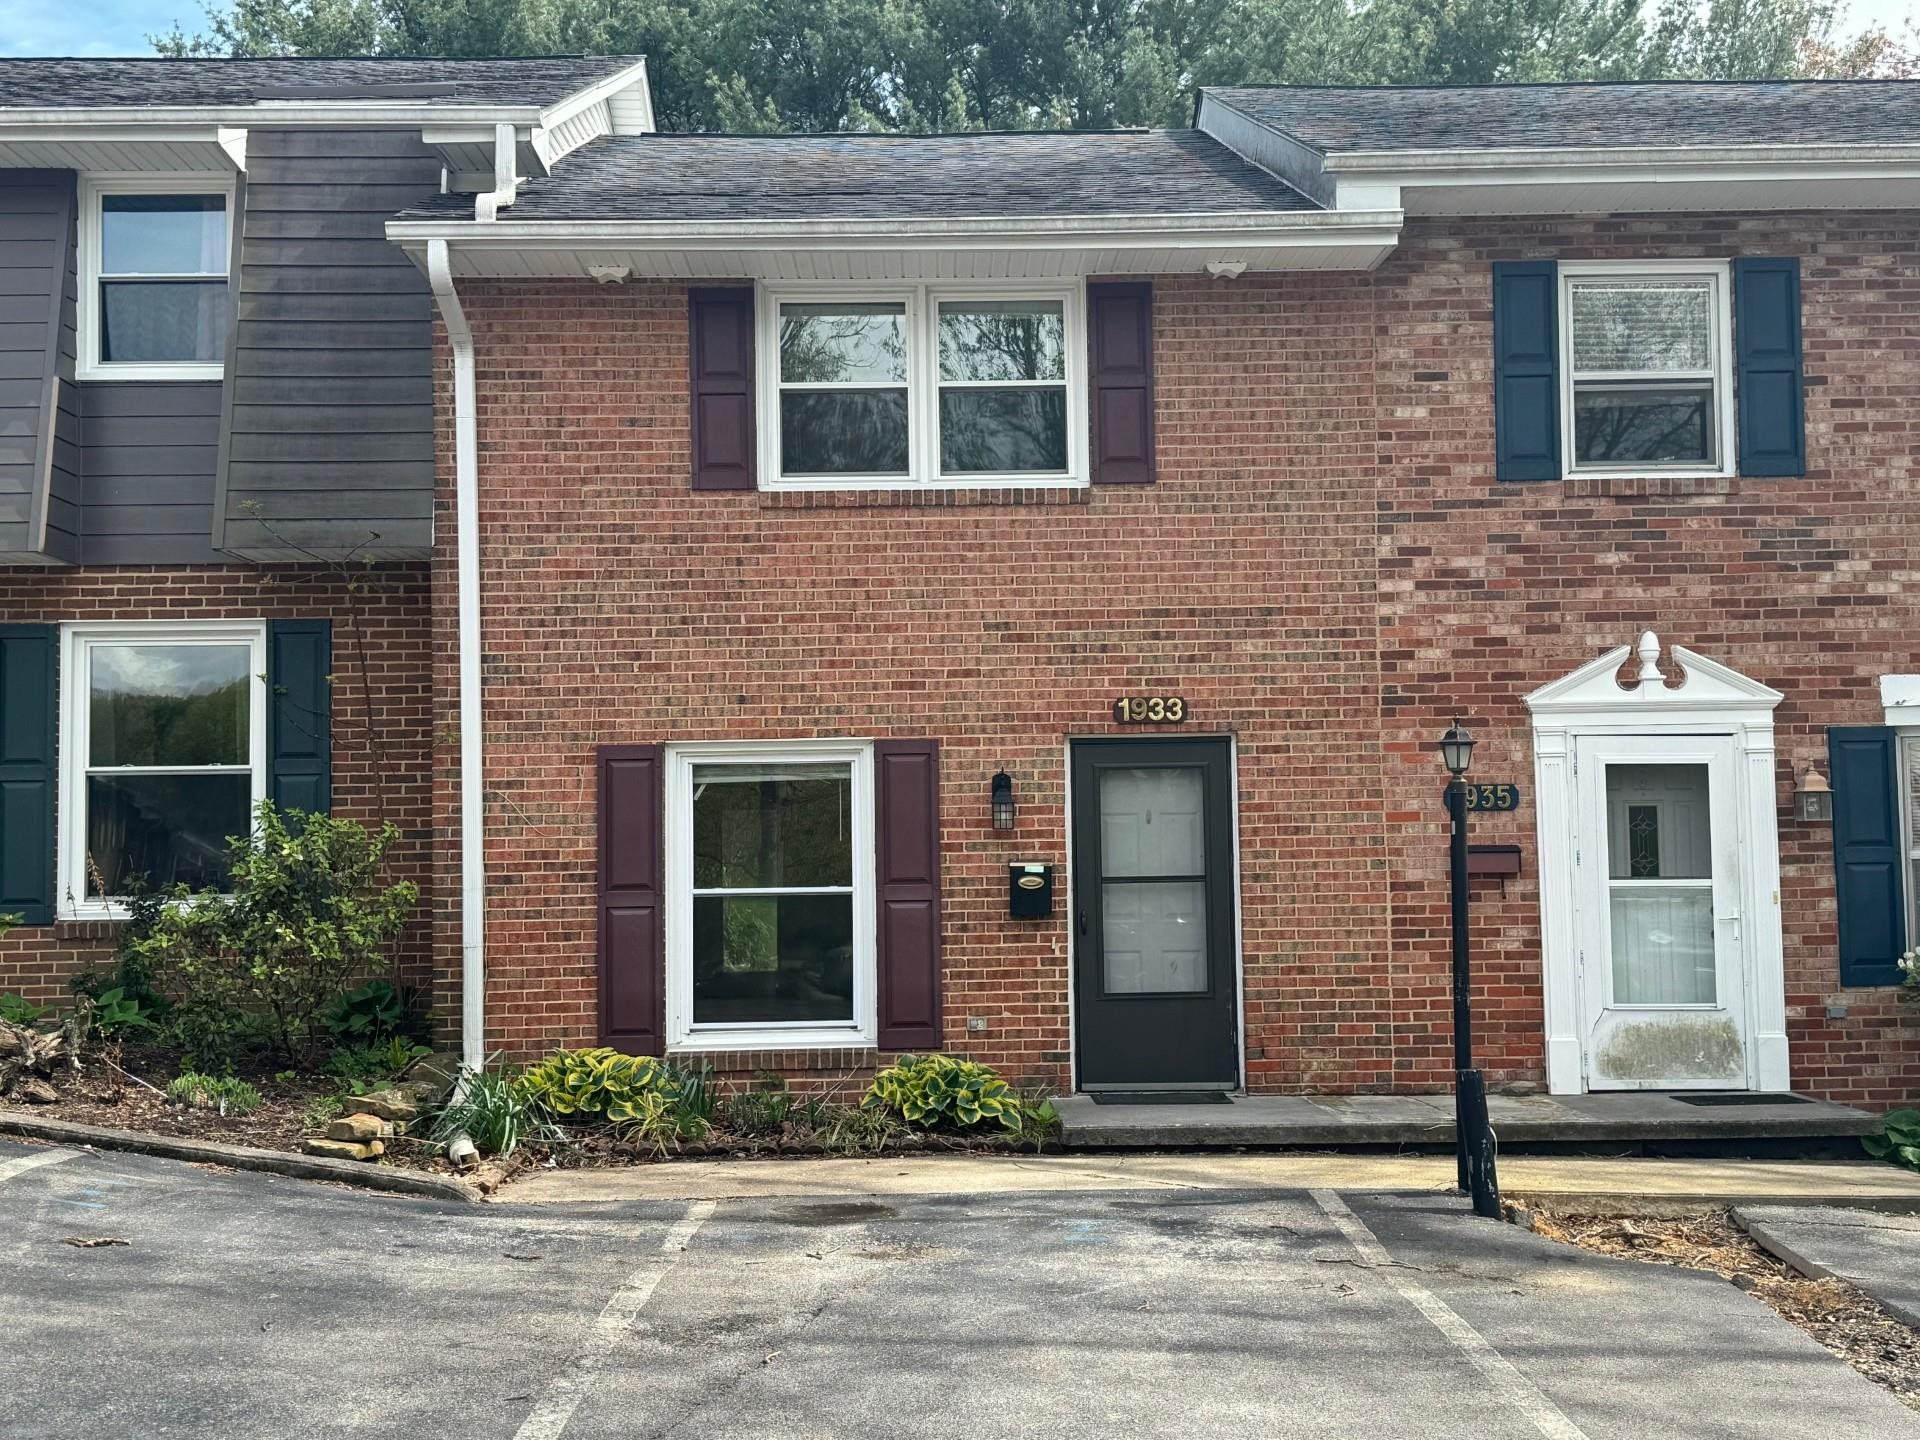 Two bedroom townhouse in Blacksburg on Blacksburg Transit bus route.  Quiet neighborhood.  Very near shopping, campus, and Nellies Cave Park.  Sold as-is.